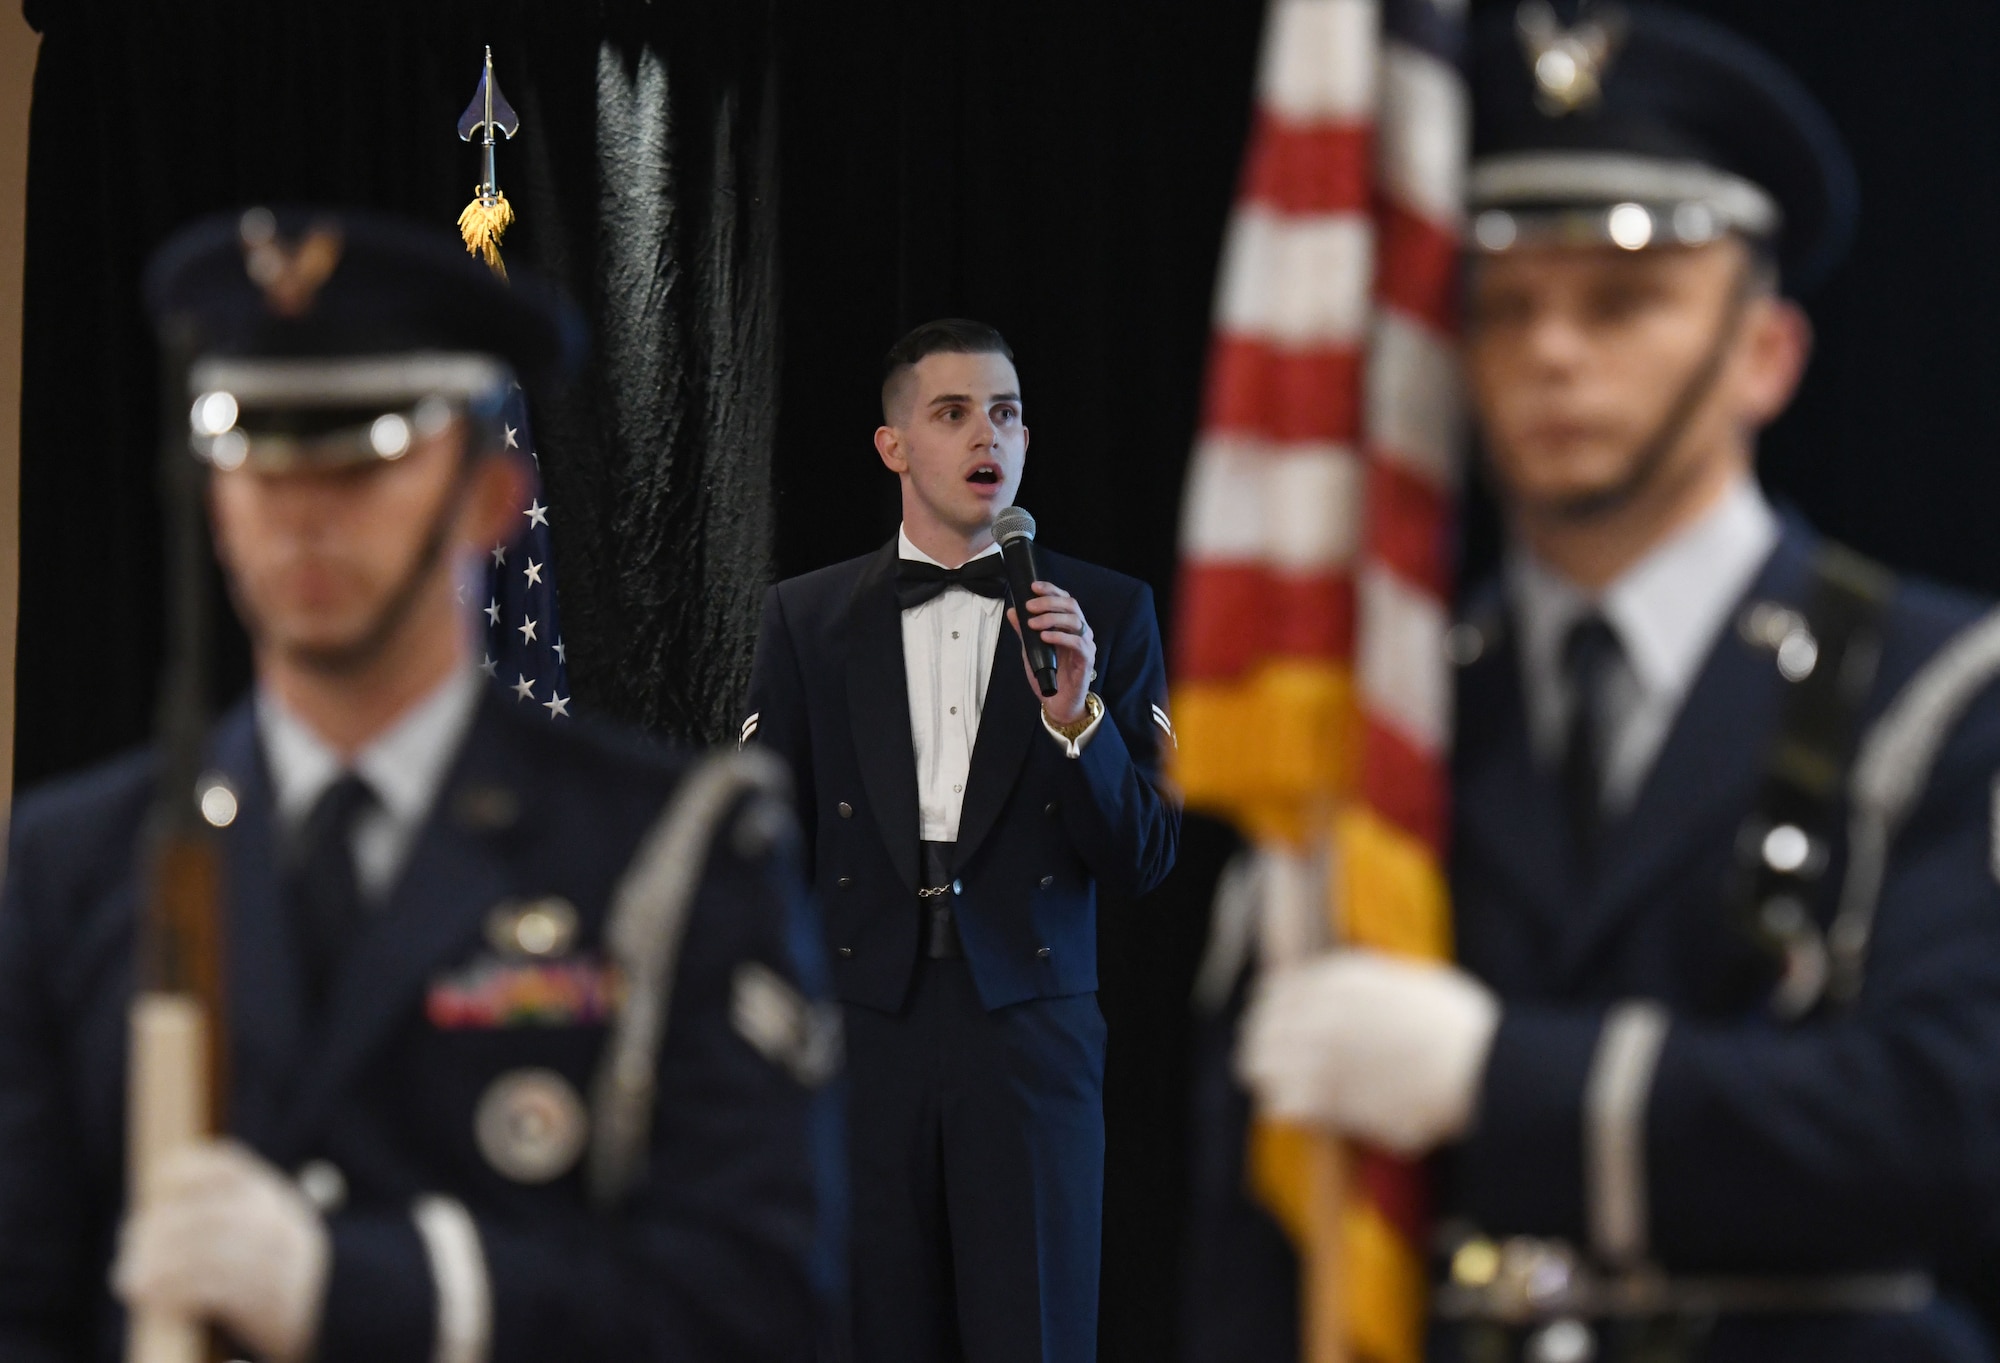 U.S. Air Force Airman 1st Class Jordan Rhea, 81st Force Support Squadron customer support technician, sings the national anthem during the U.S Air Force 71st Birthday Ball at the Imperial Palace Casino, Biloxi, Mississippi, Sept. 22, 2018. The event was hosted by the 81st Training Wing and the John C. Stennis Chapter Air Force Association. (U.S. Air Force photo by Kemberly Groue)